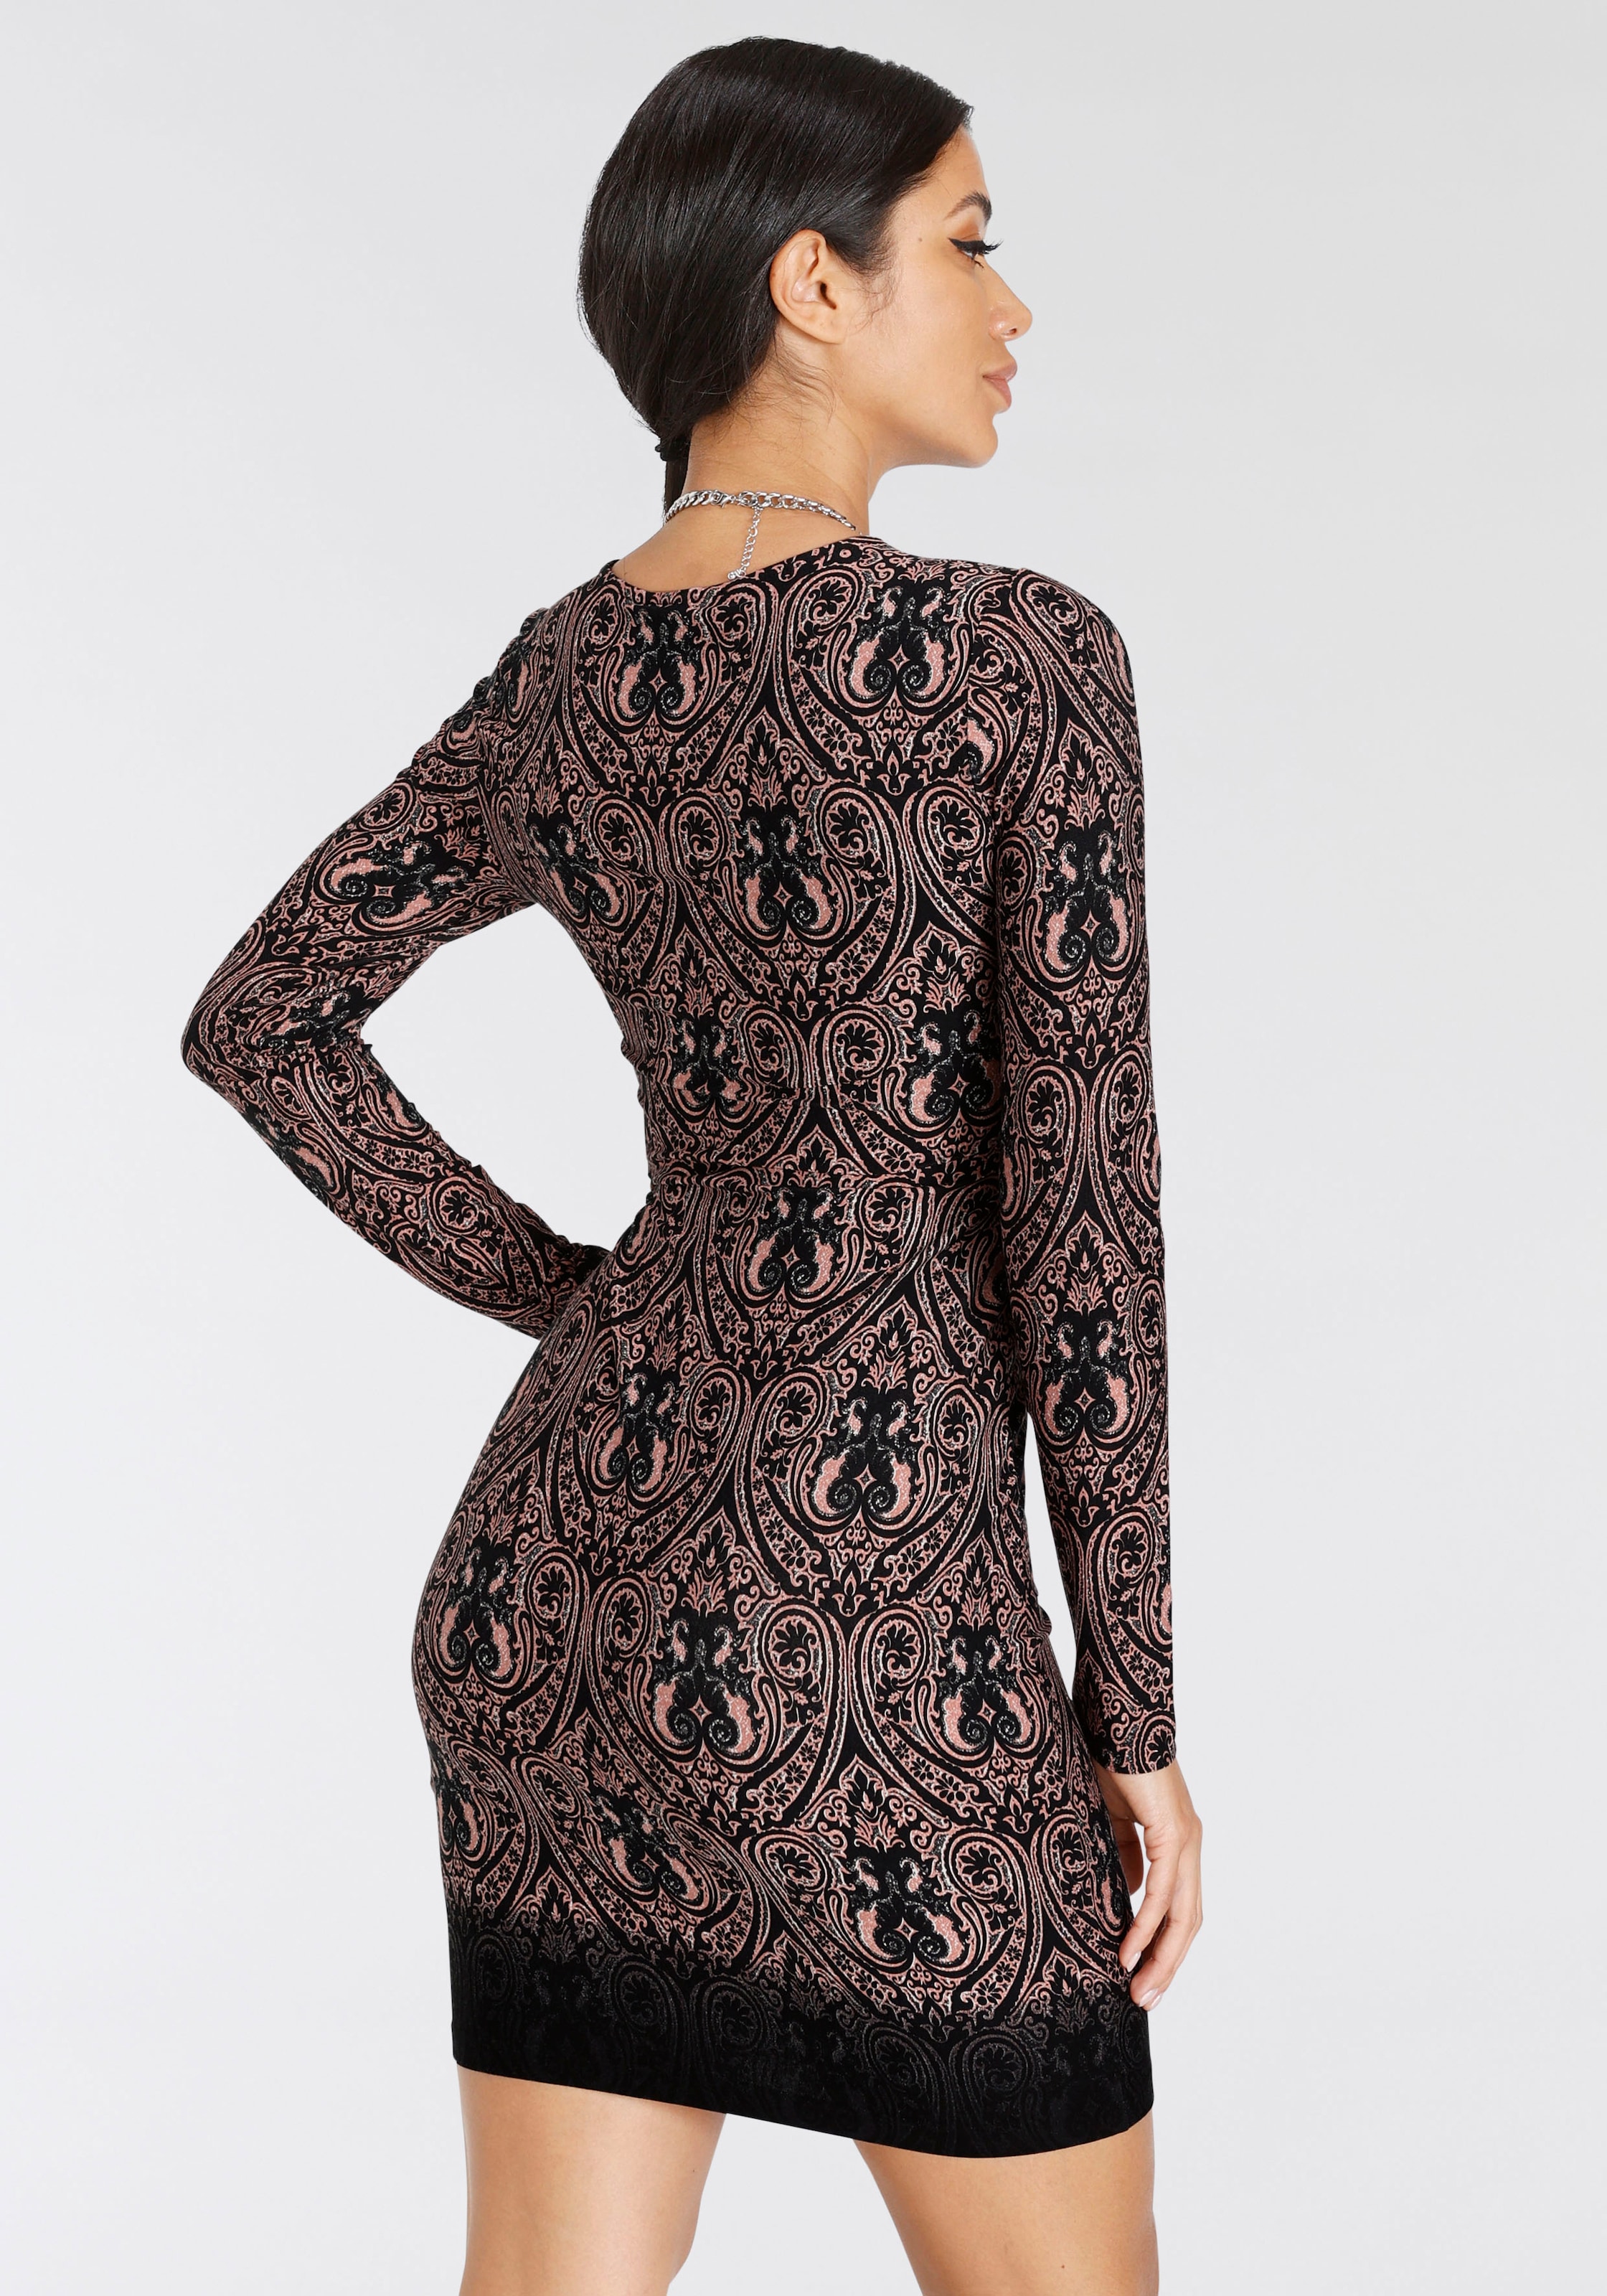 Paisley-Muster mit Melrose bei ♕ und Jerseykleid, Cut-Out